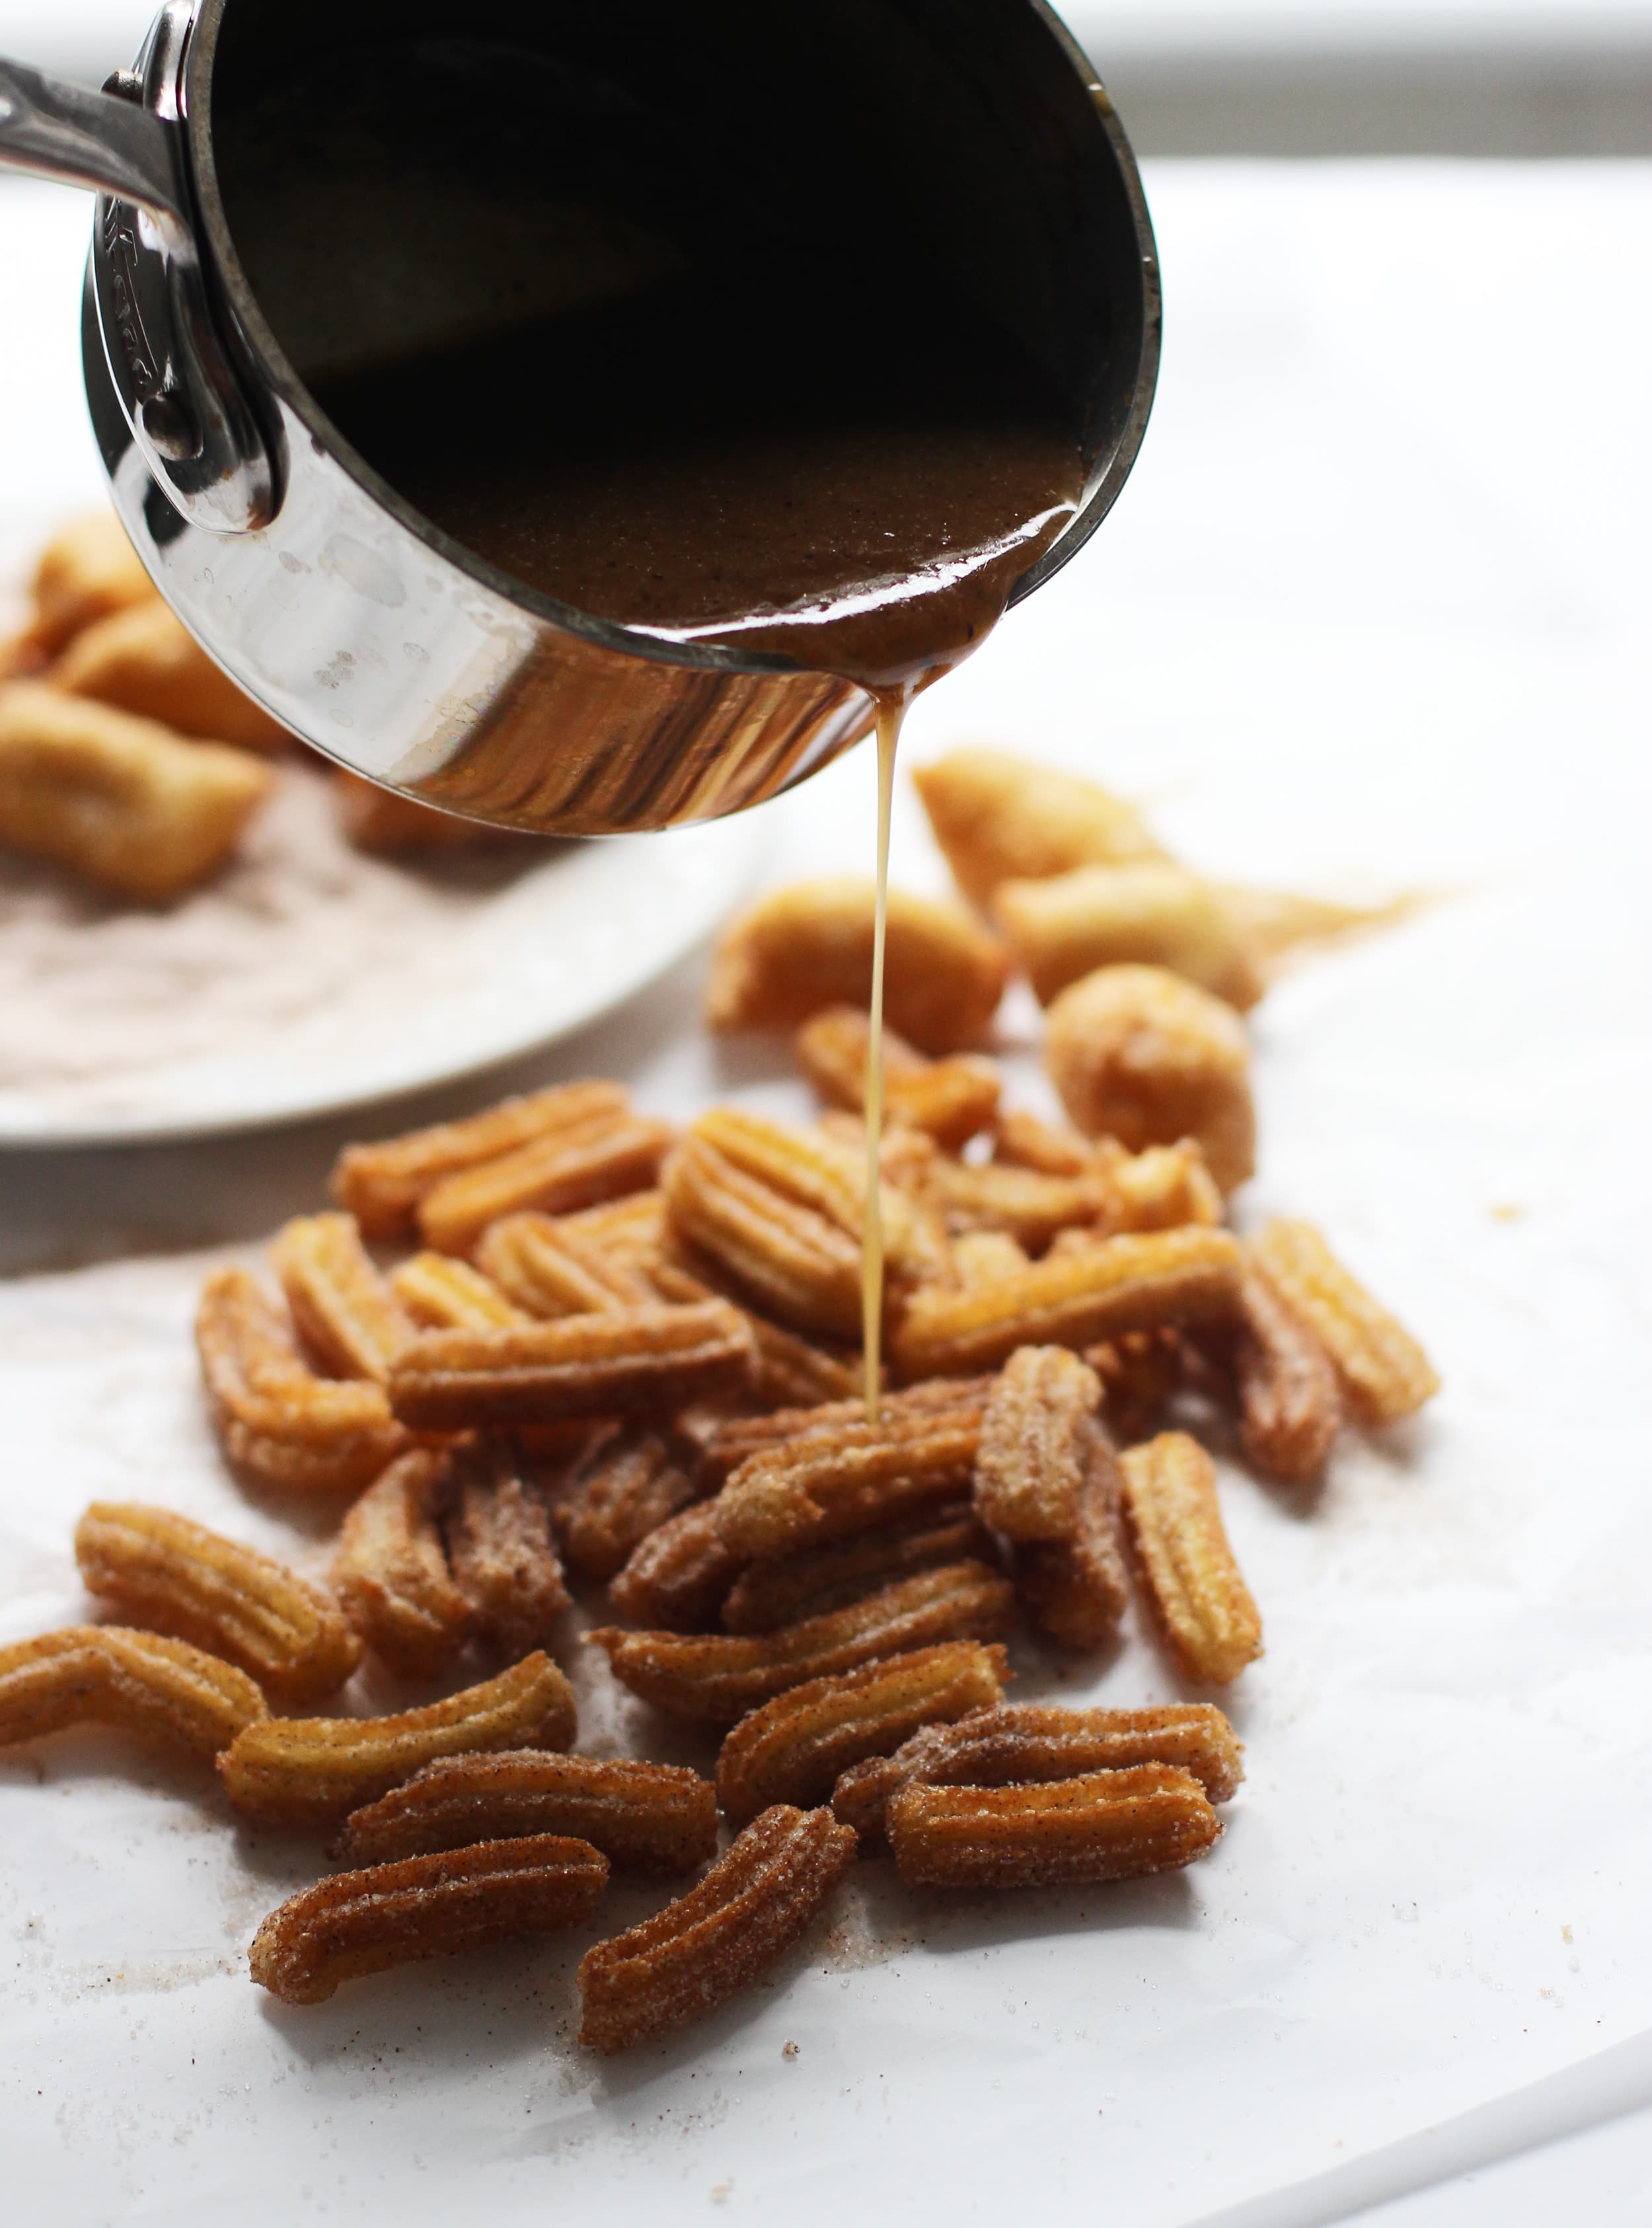 Brown Butter Churro Fries with Three Minute Salted Brown Butter Caramel Drizzle